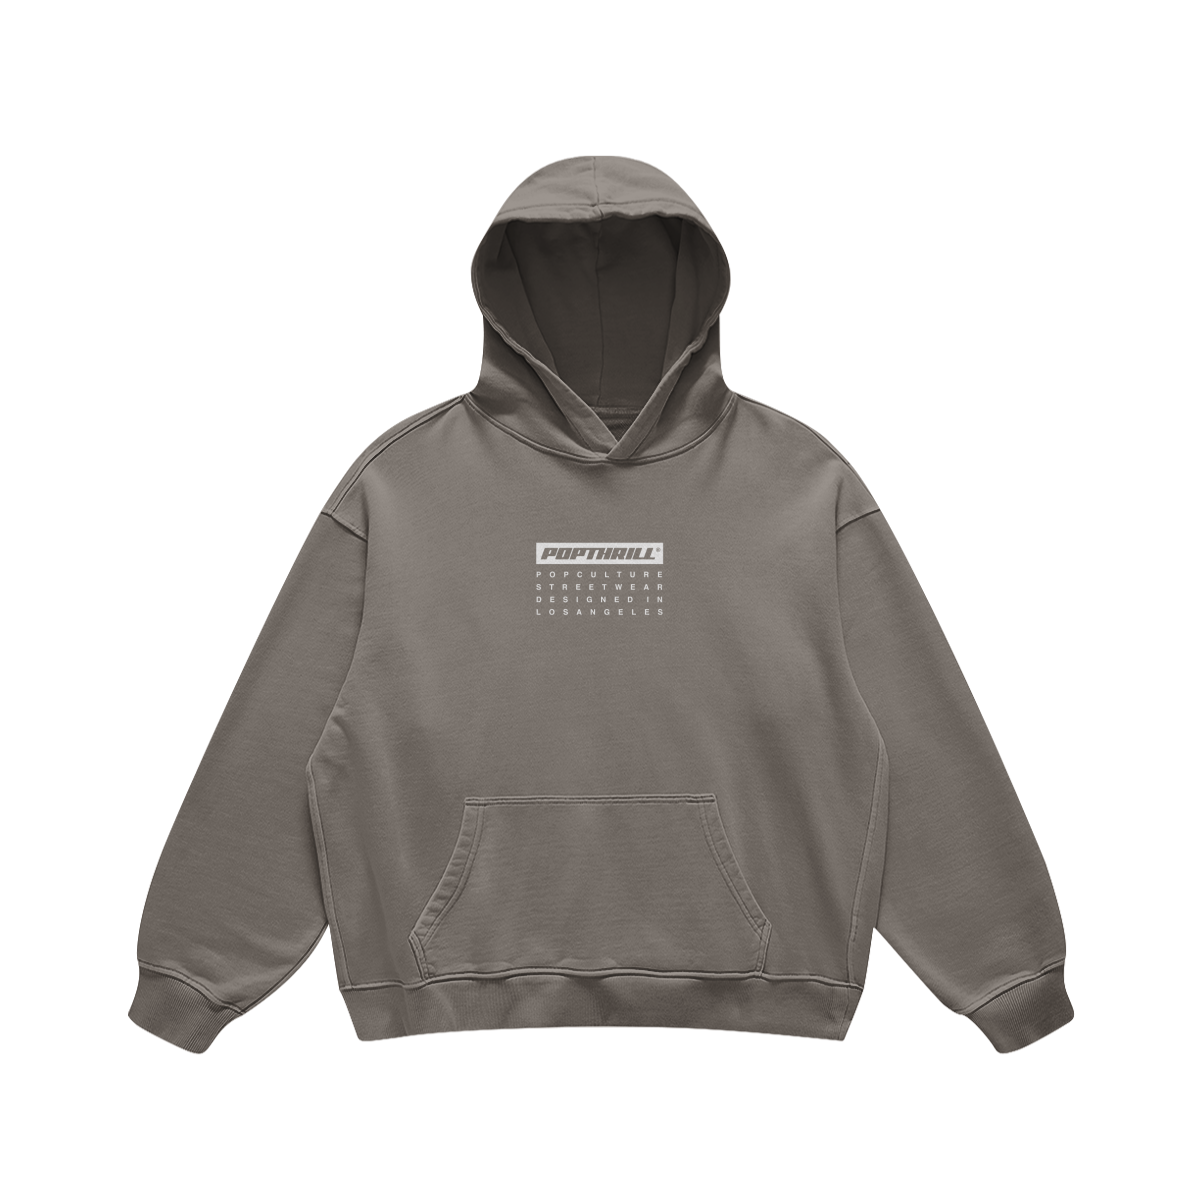 POPTHRILL® LOOSE FIT HEAVYWEIGHT HOODIE - BRAND LOGO